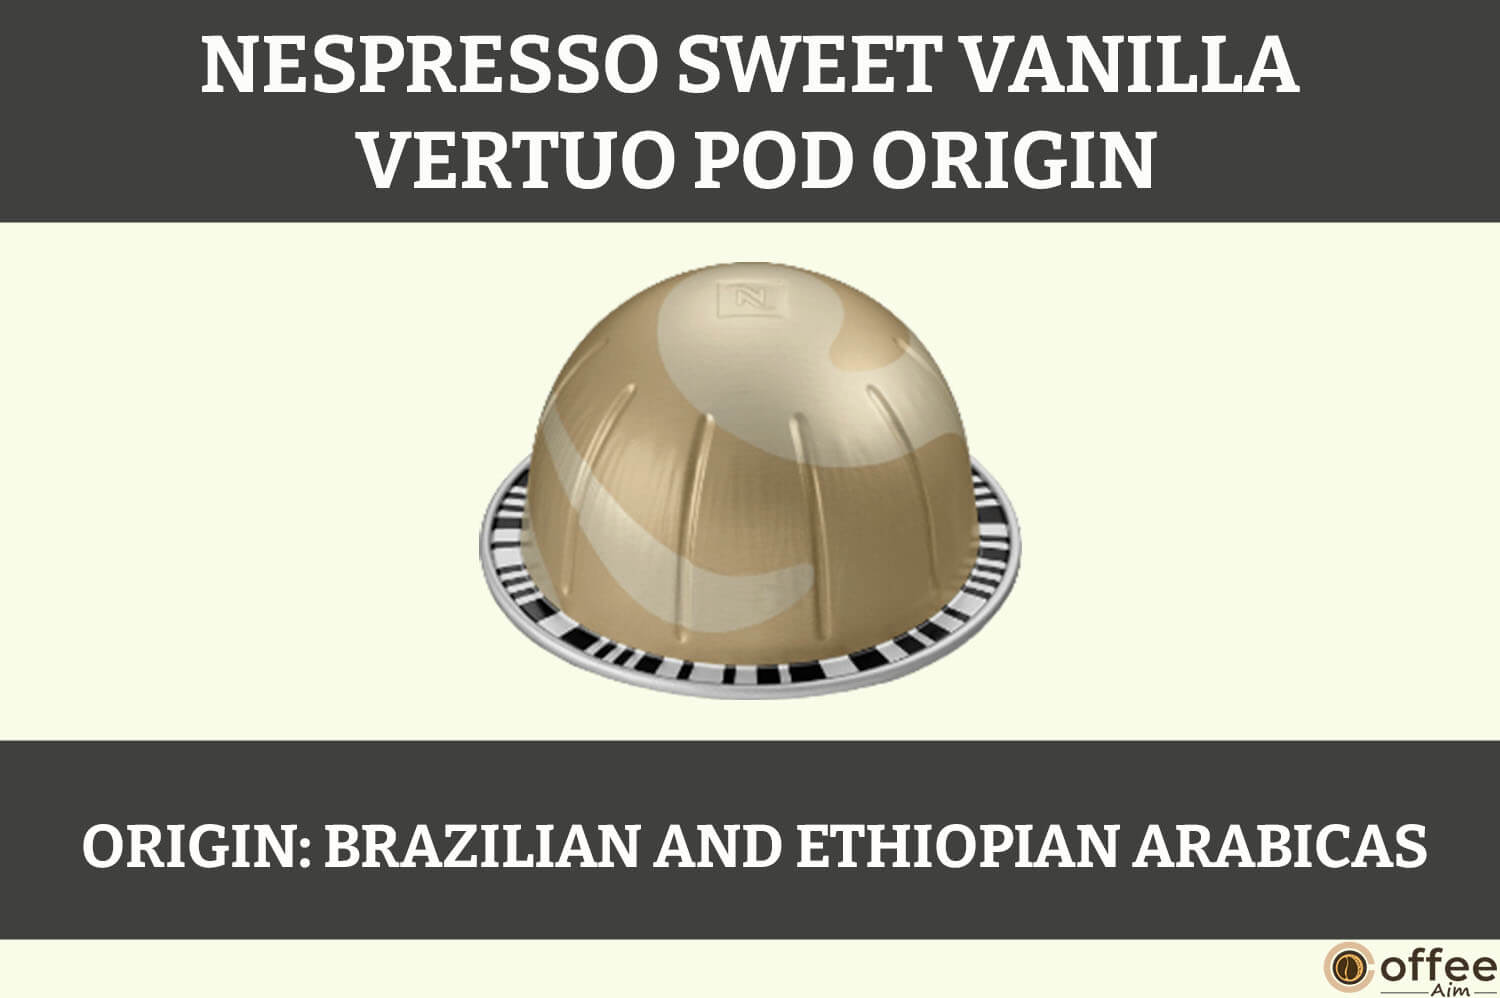 This image depicts the origin of the Nespresso Sweet Vanilla Vertuo Pod, intended for the article titled 'Nespresso Sweet Vanilla Vertuo Pod Review'